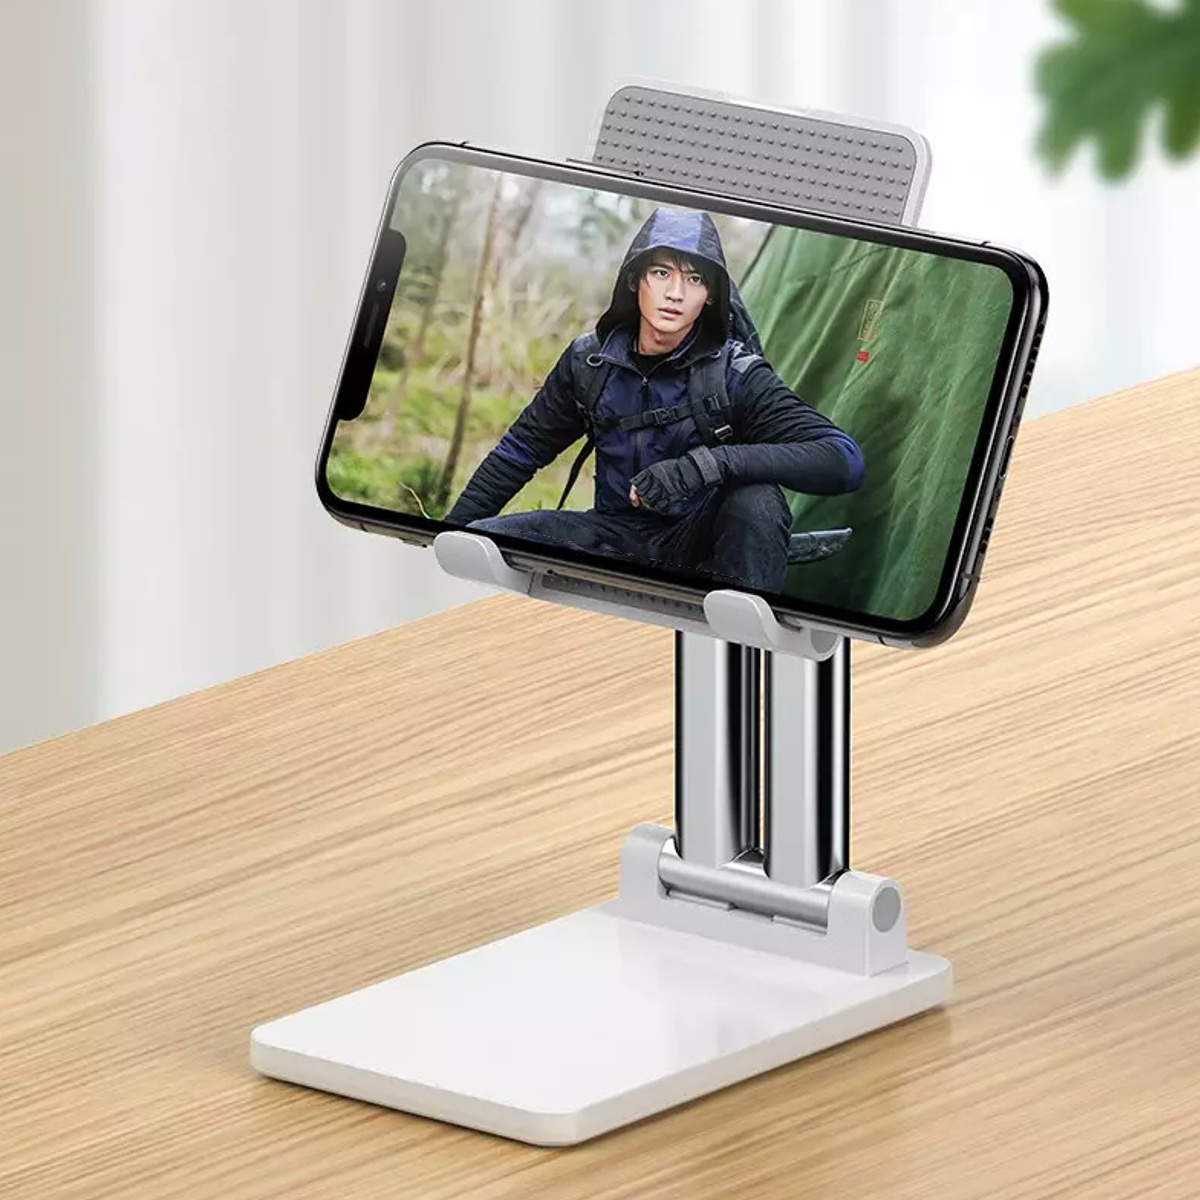 CCT7-Universal-Folding-Telescopic-Desktop-Mobile-Phone-Tablet-Holder-Stand-for-iPad-Air-for-iPhone-1-1820703-11